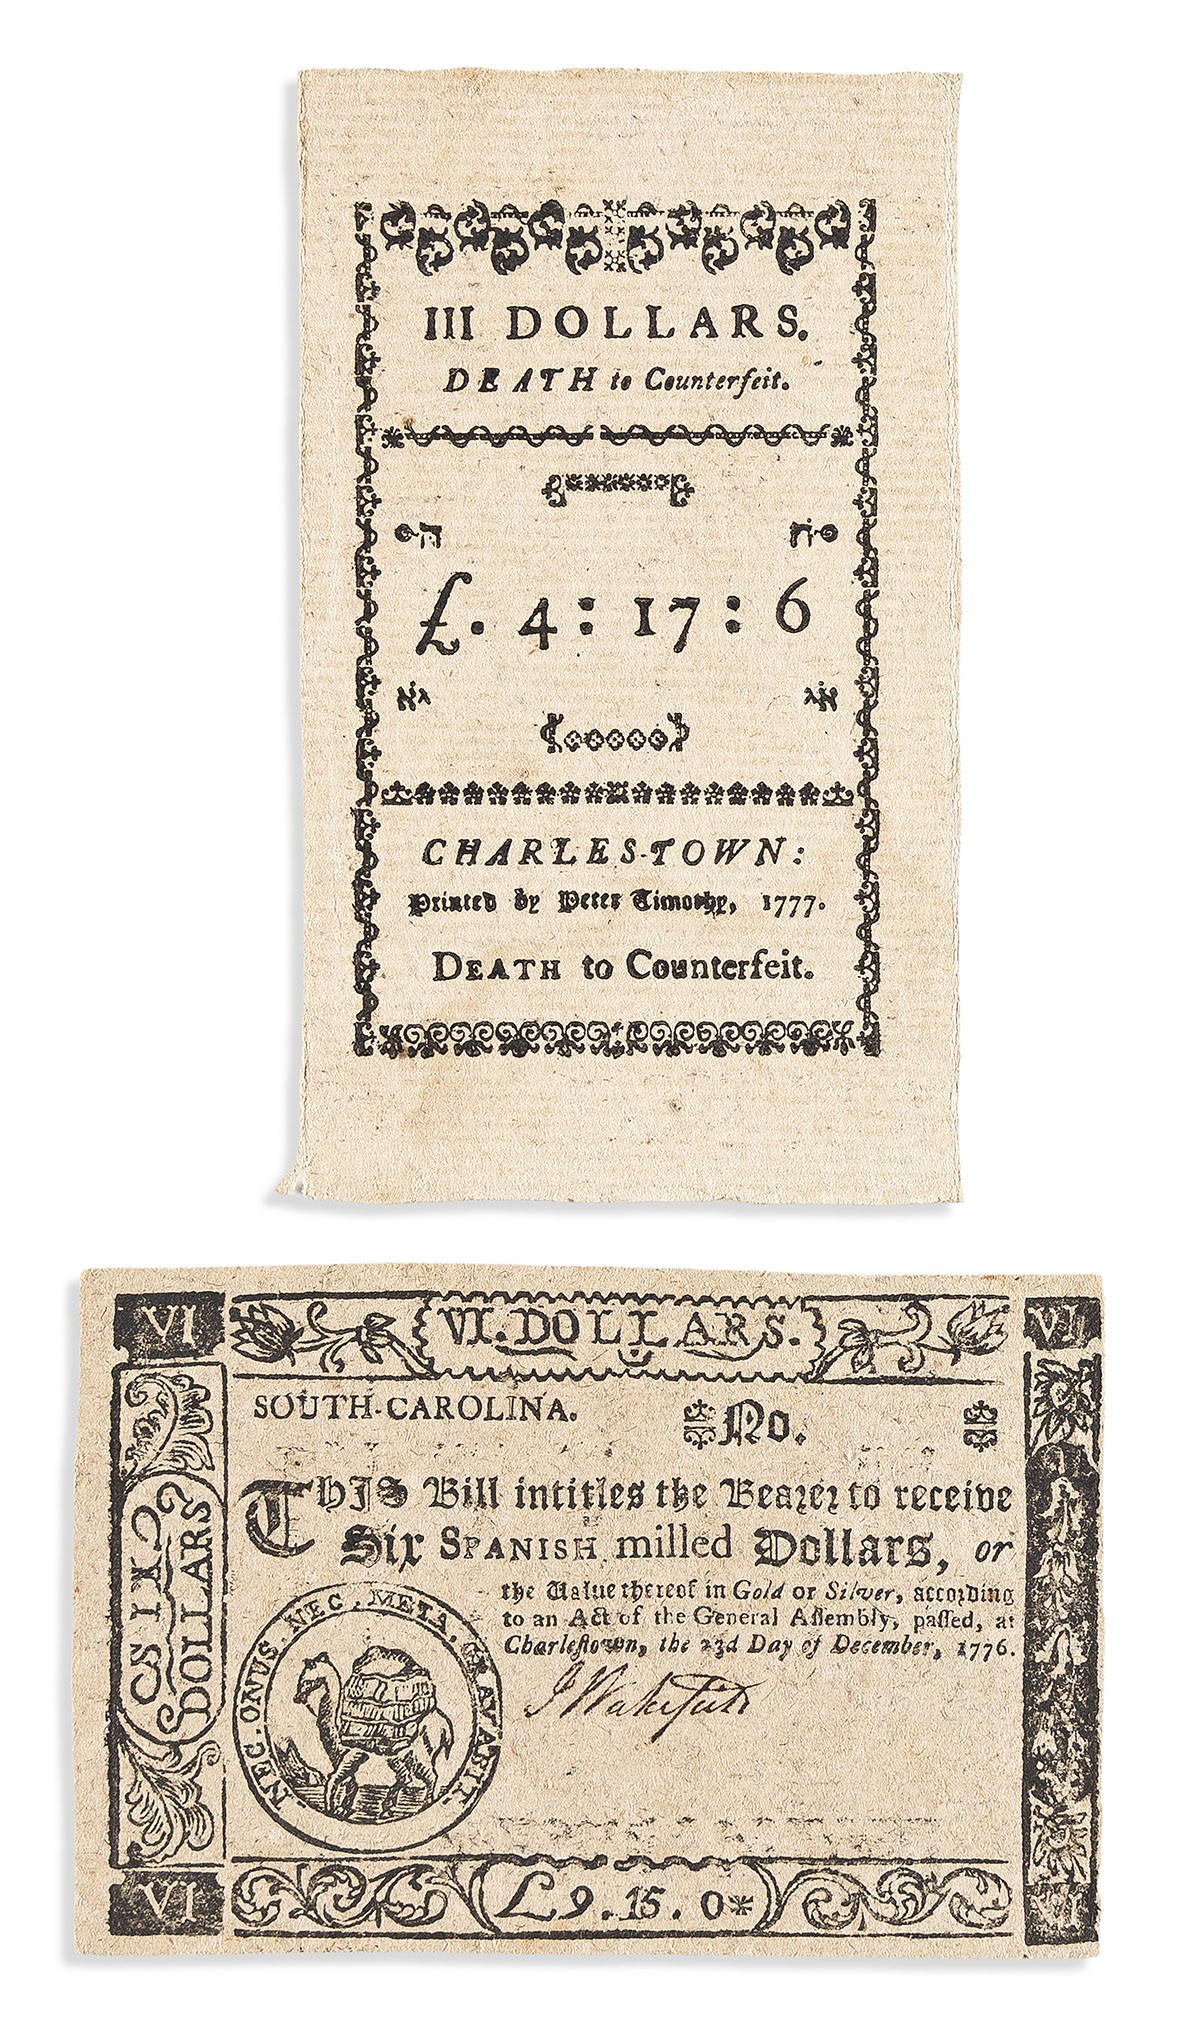 (AMERICAN REVOLUTION--CURRENCY.) Two pieces of paper currency issued by South Carolina early in the war.